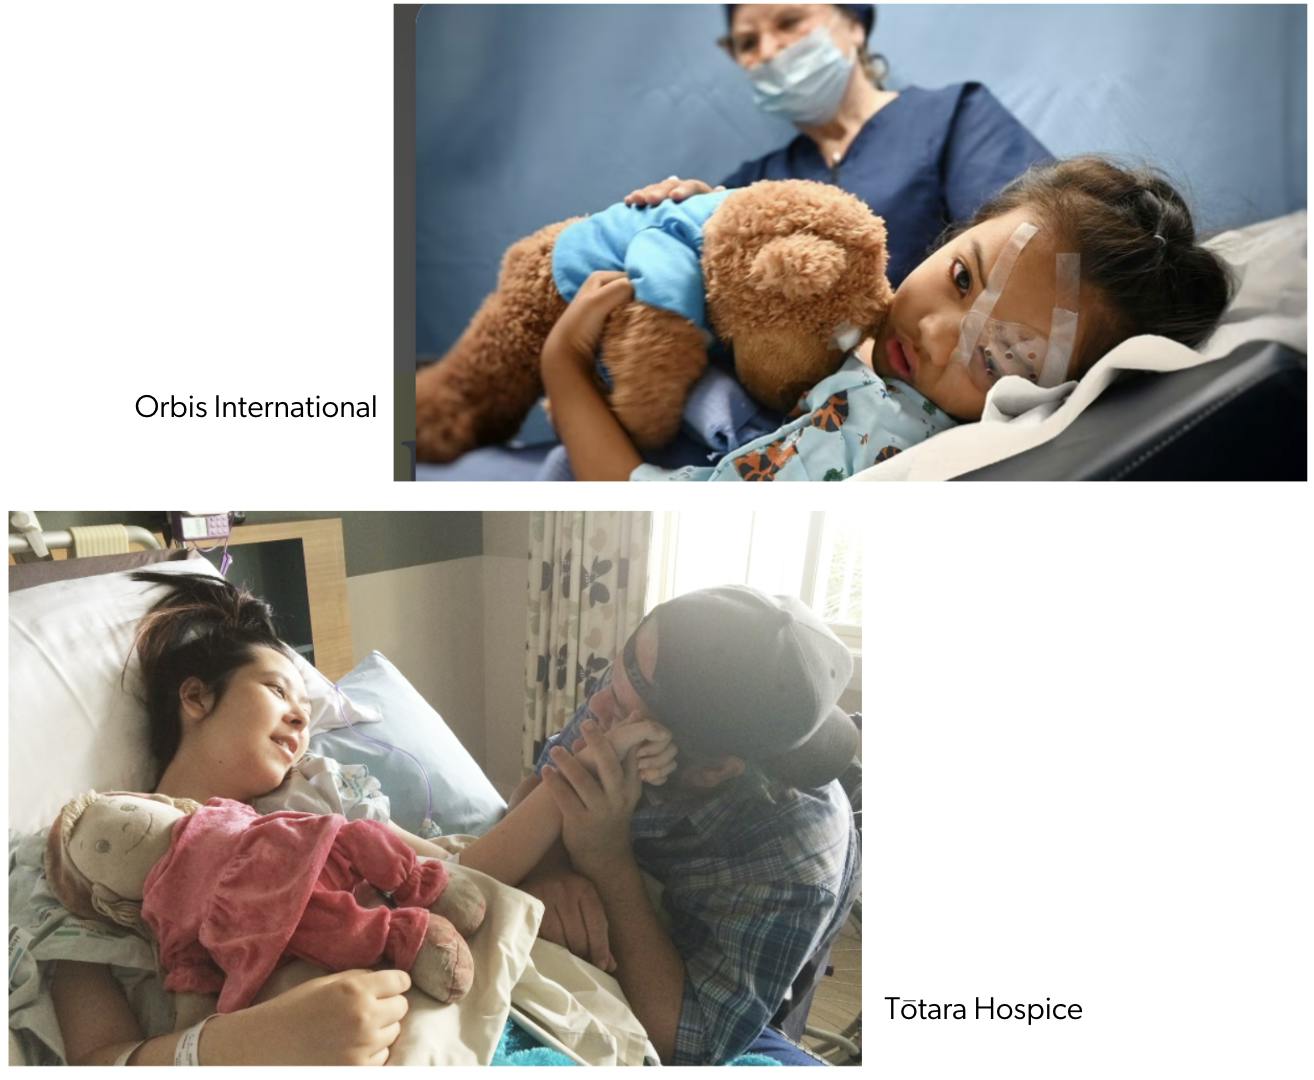 top photo of girl who just came out of eye surgery. Bottom photo is of a girl in a hospital bed. Her dad her holding her hand